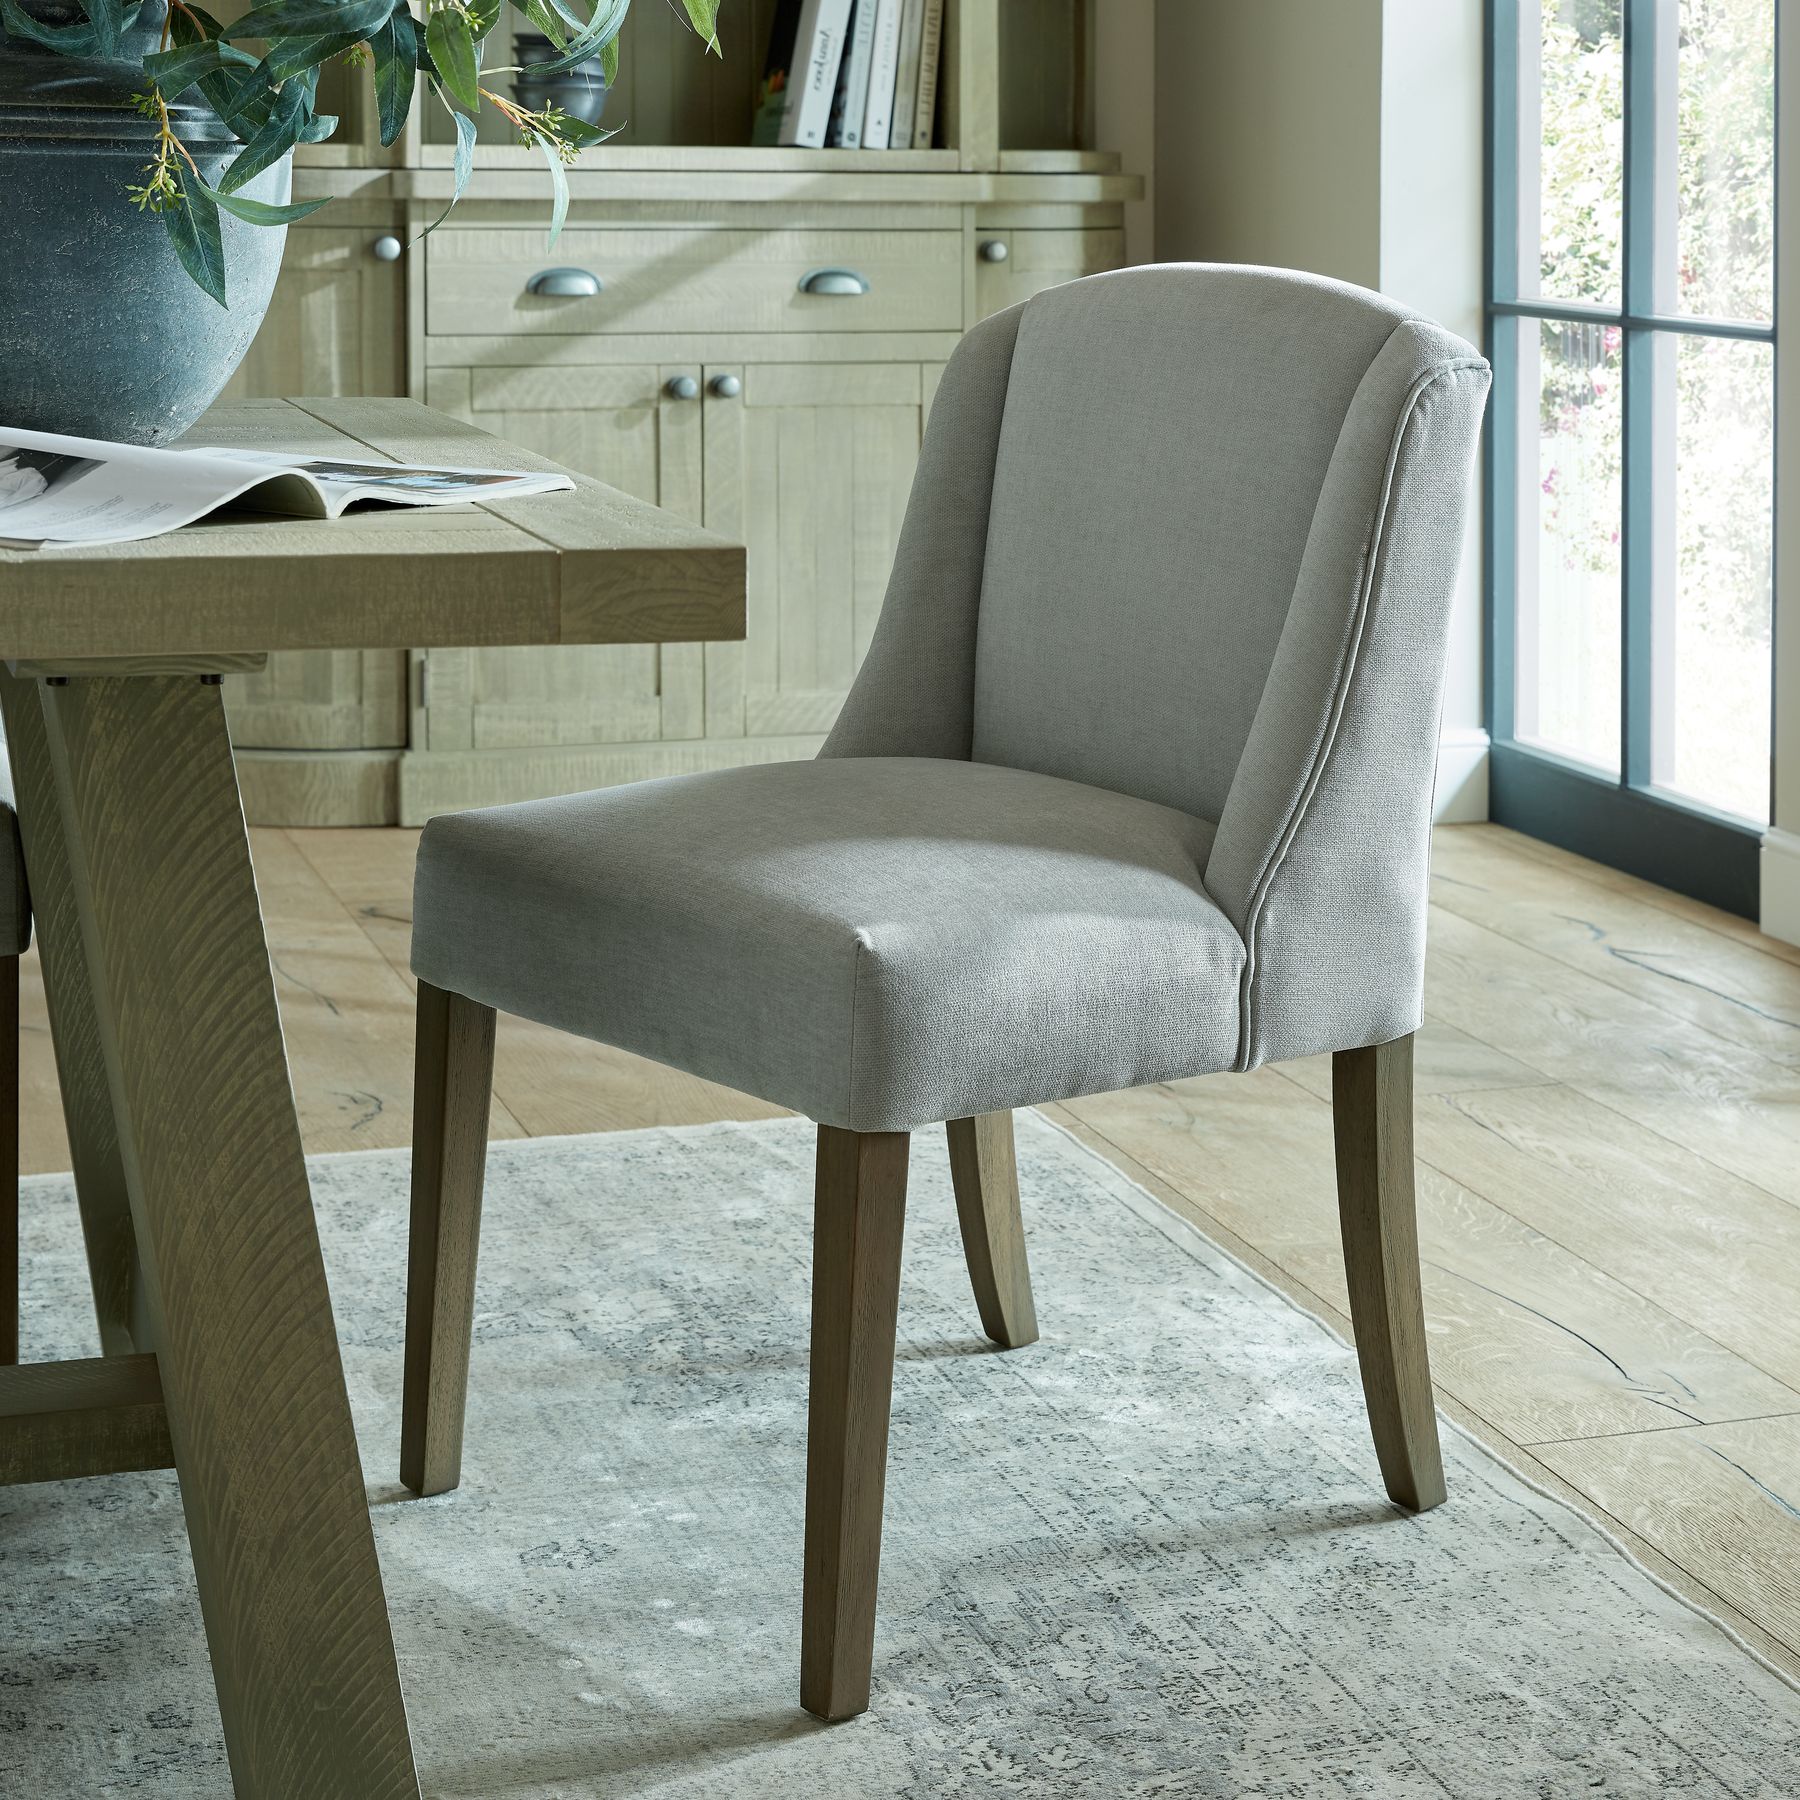 Compton Grey Dining Chair - Image 7